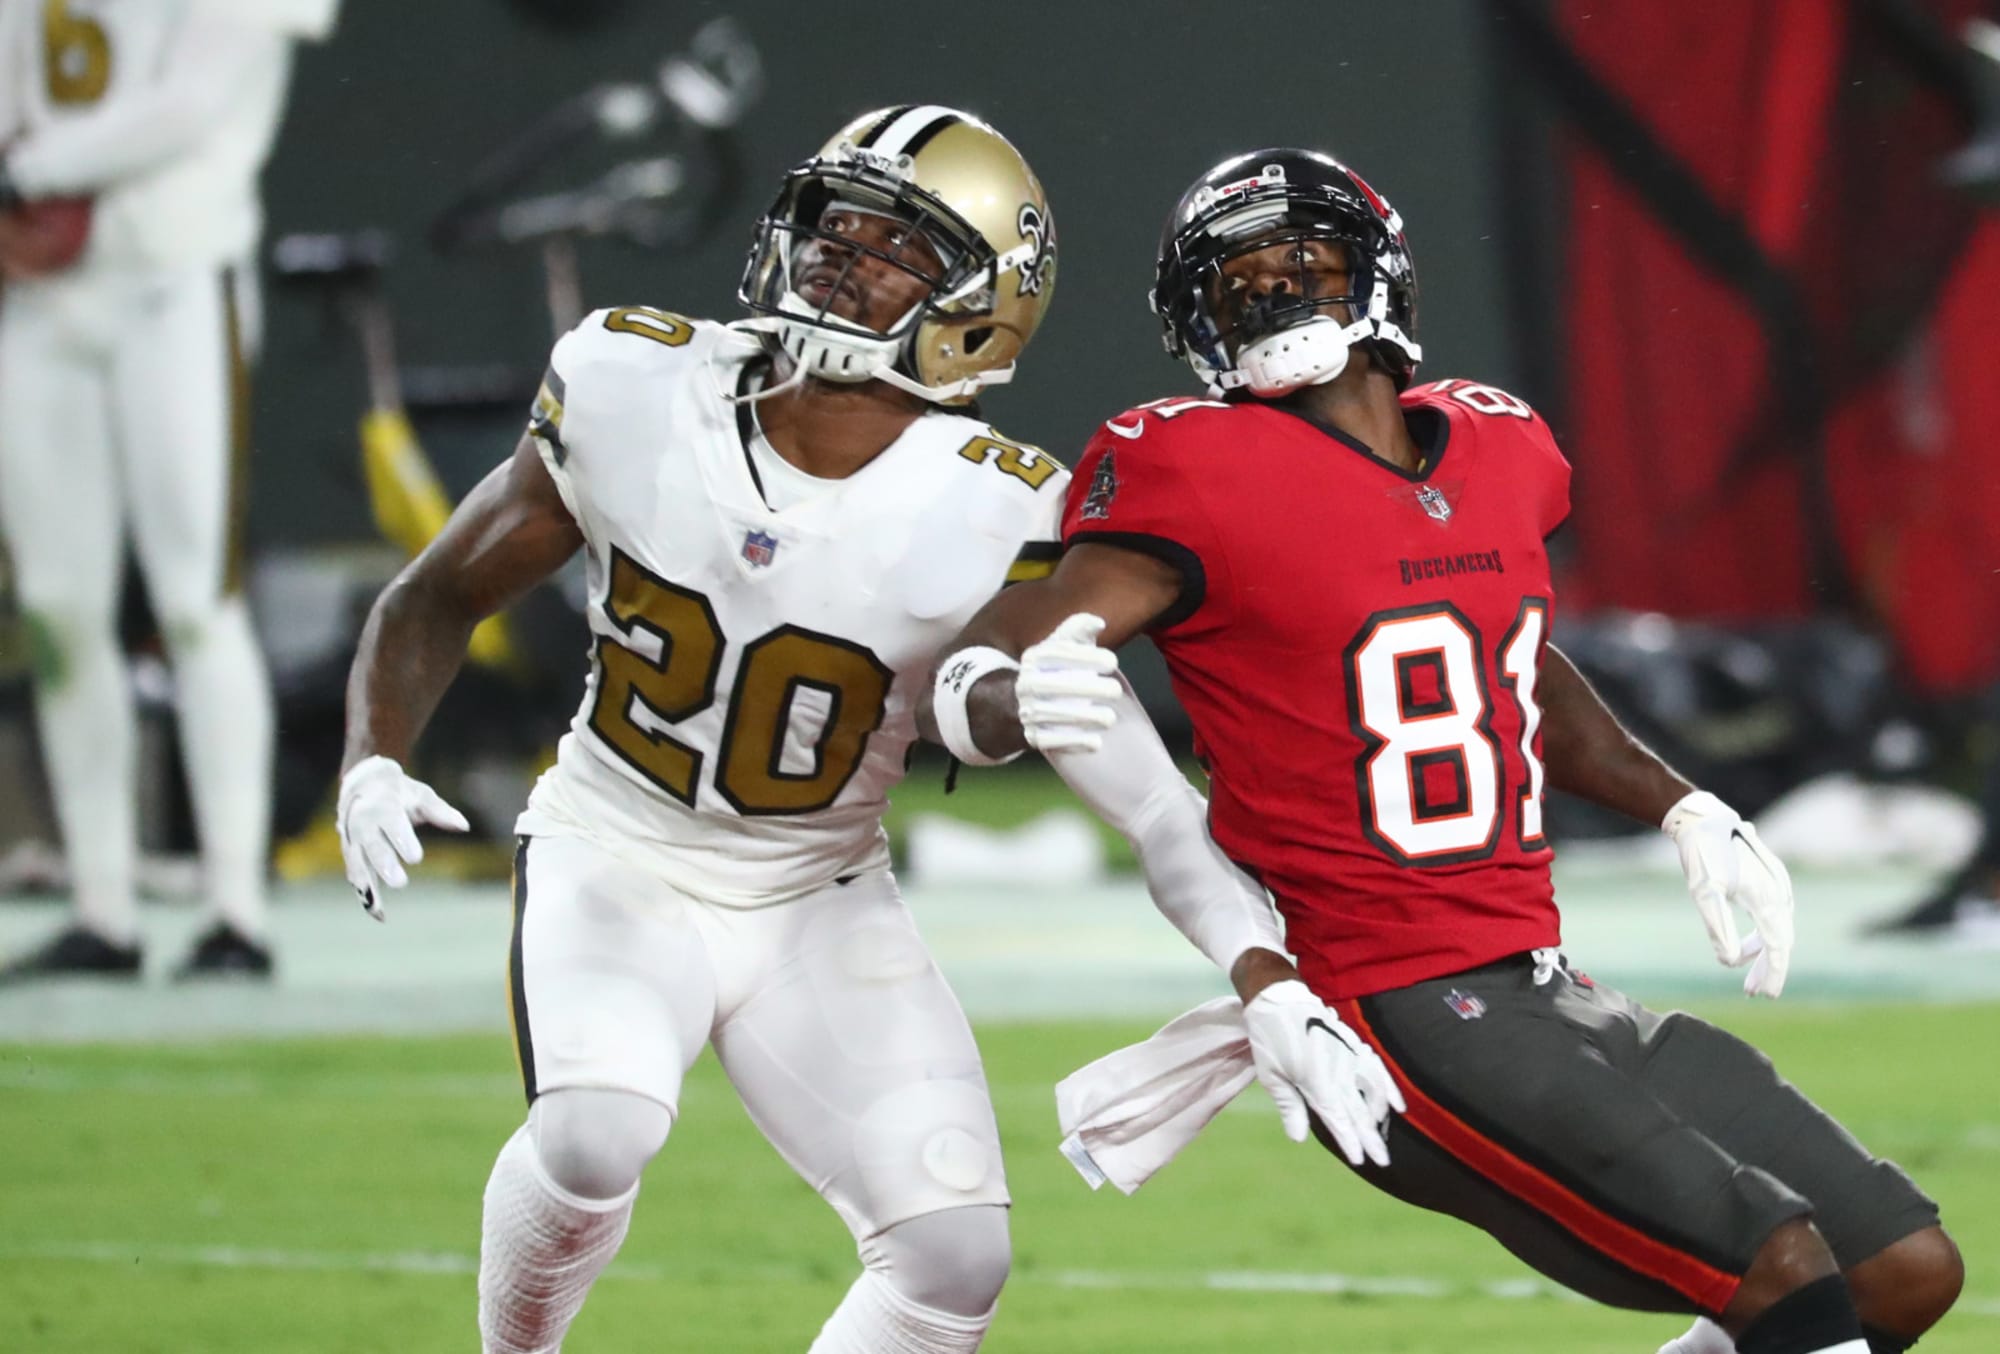 Buccaneers WR rotation and chemistry has to be developed